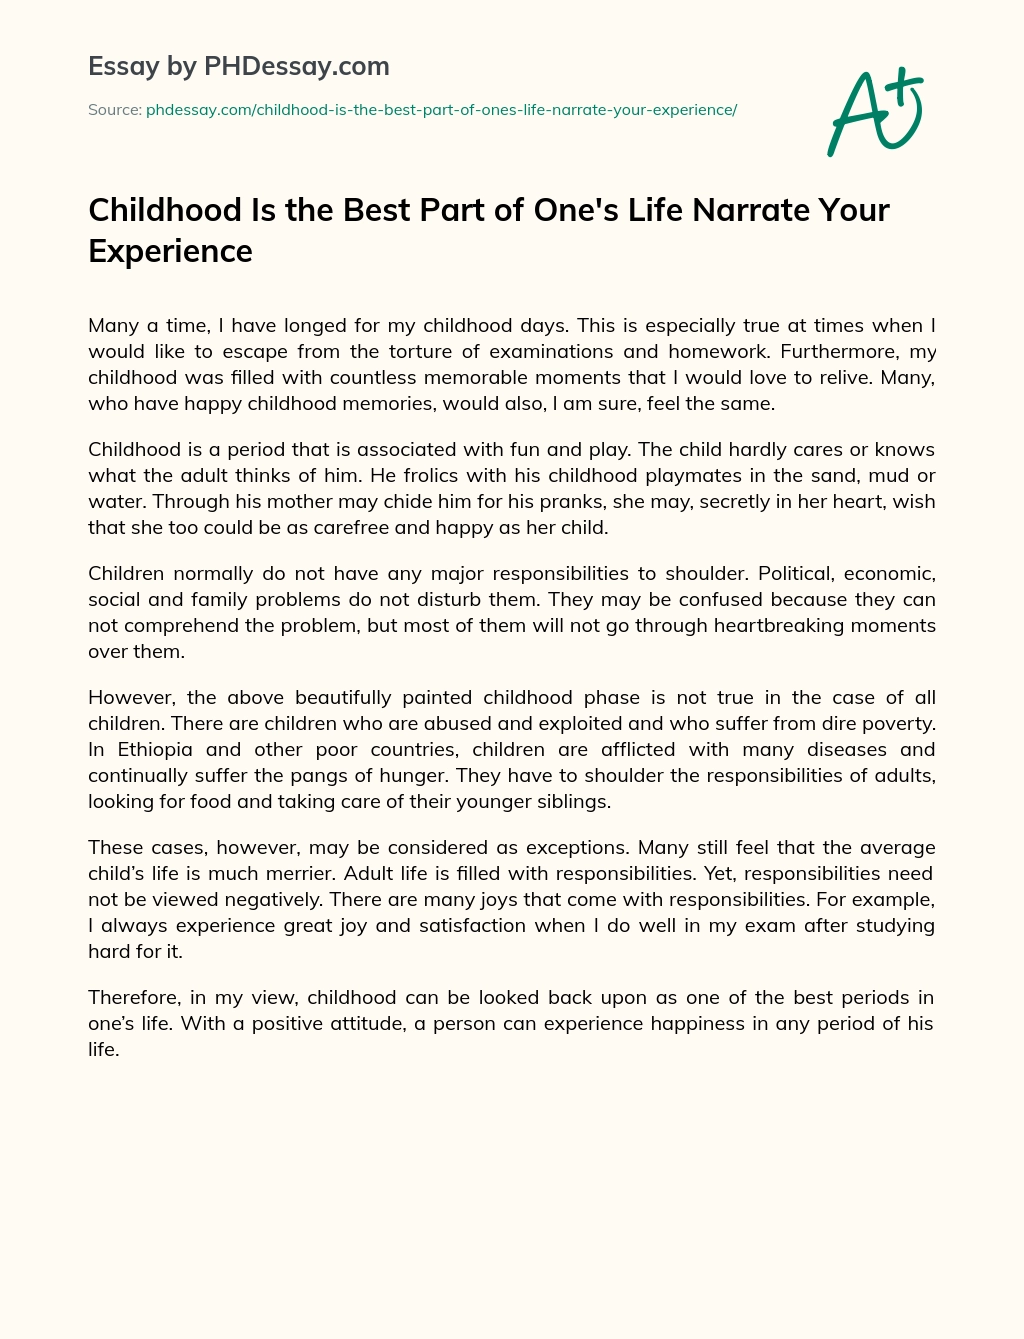 Childhood Is the Best Part of One’s Life Narrate Your Experience essay